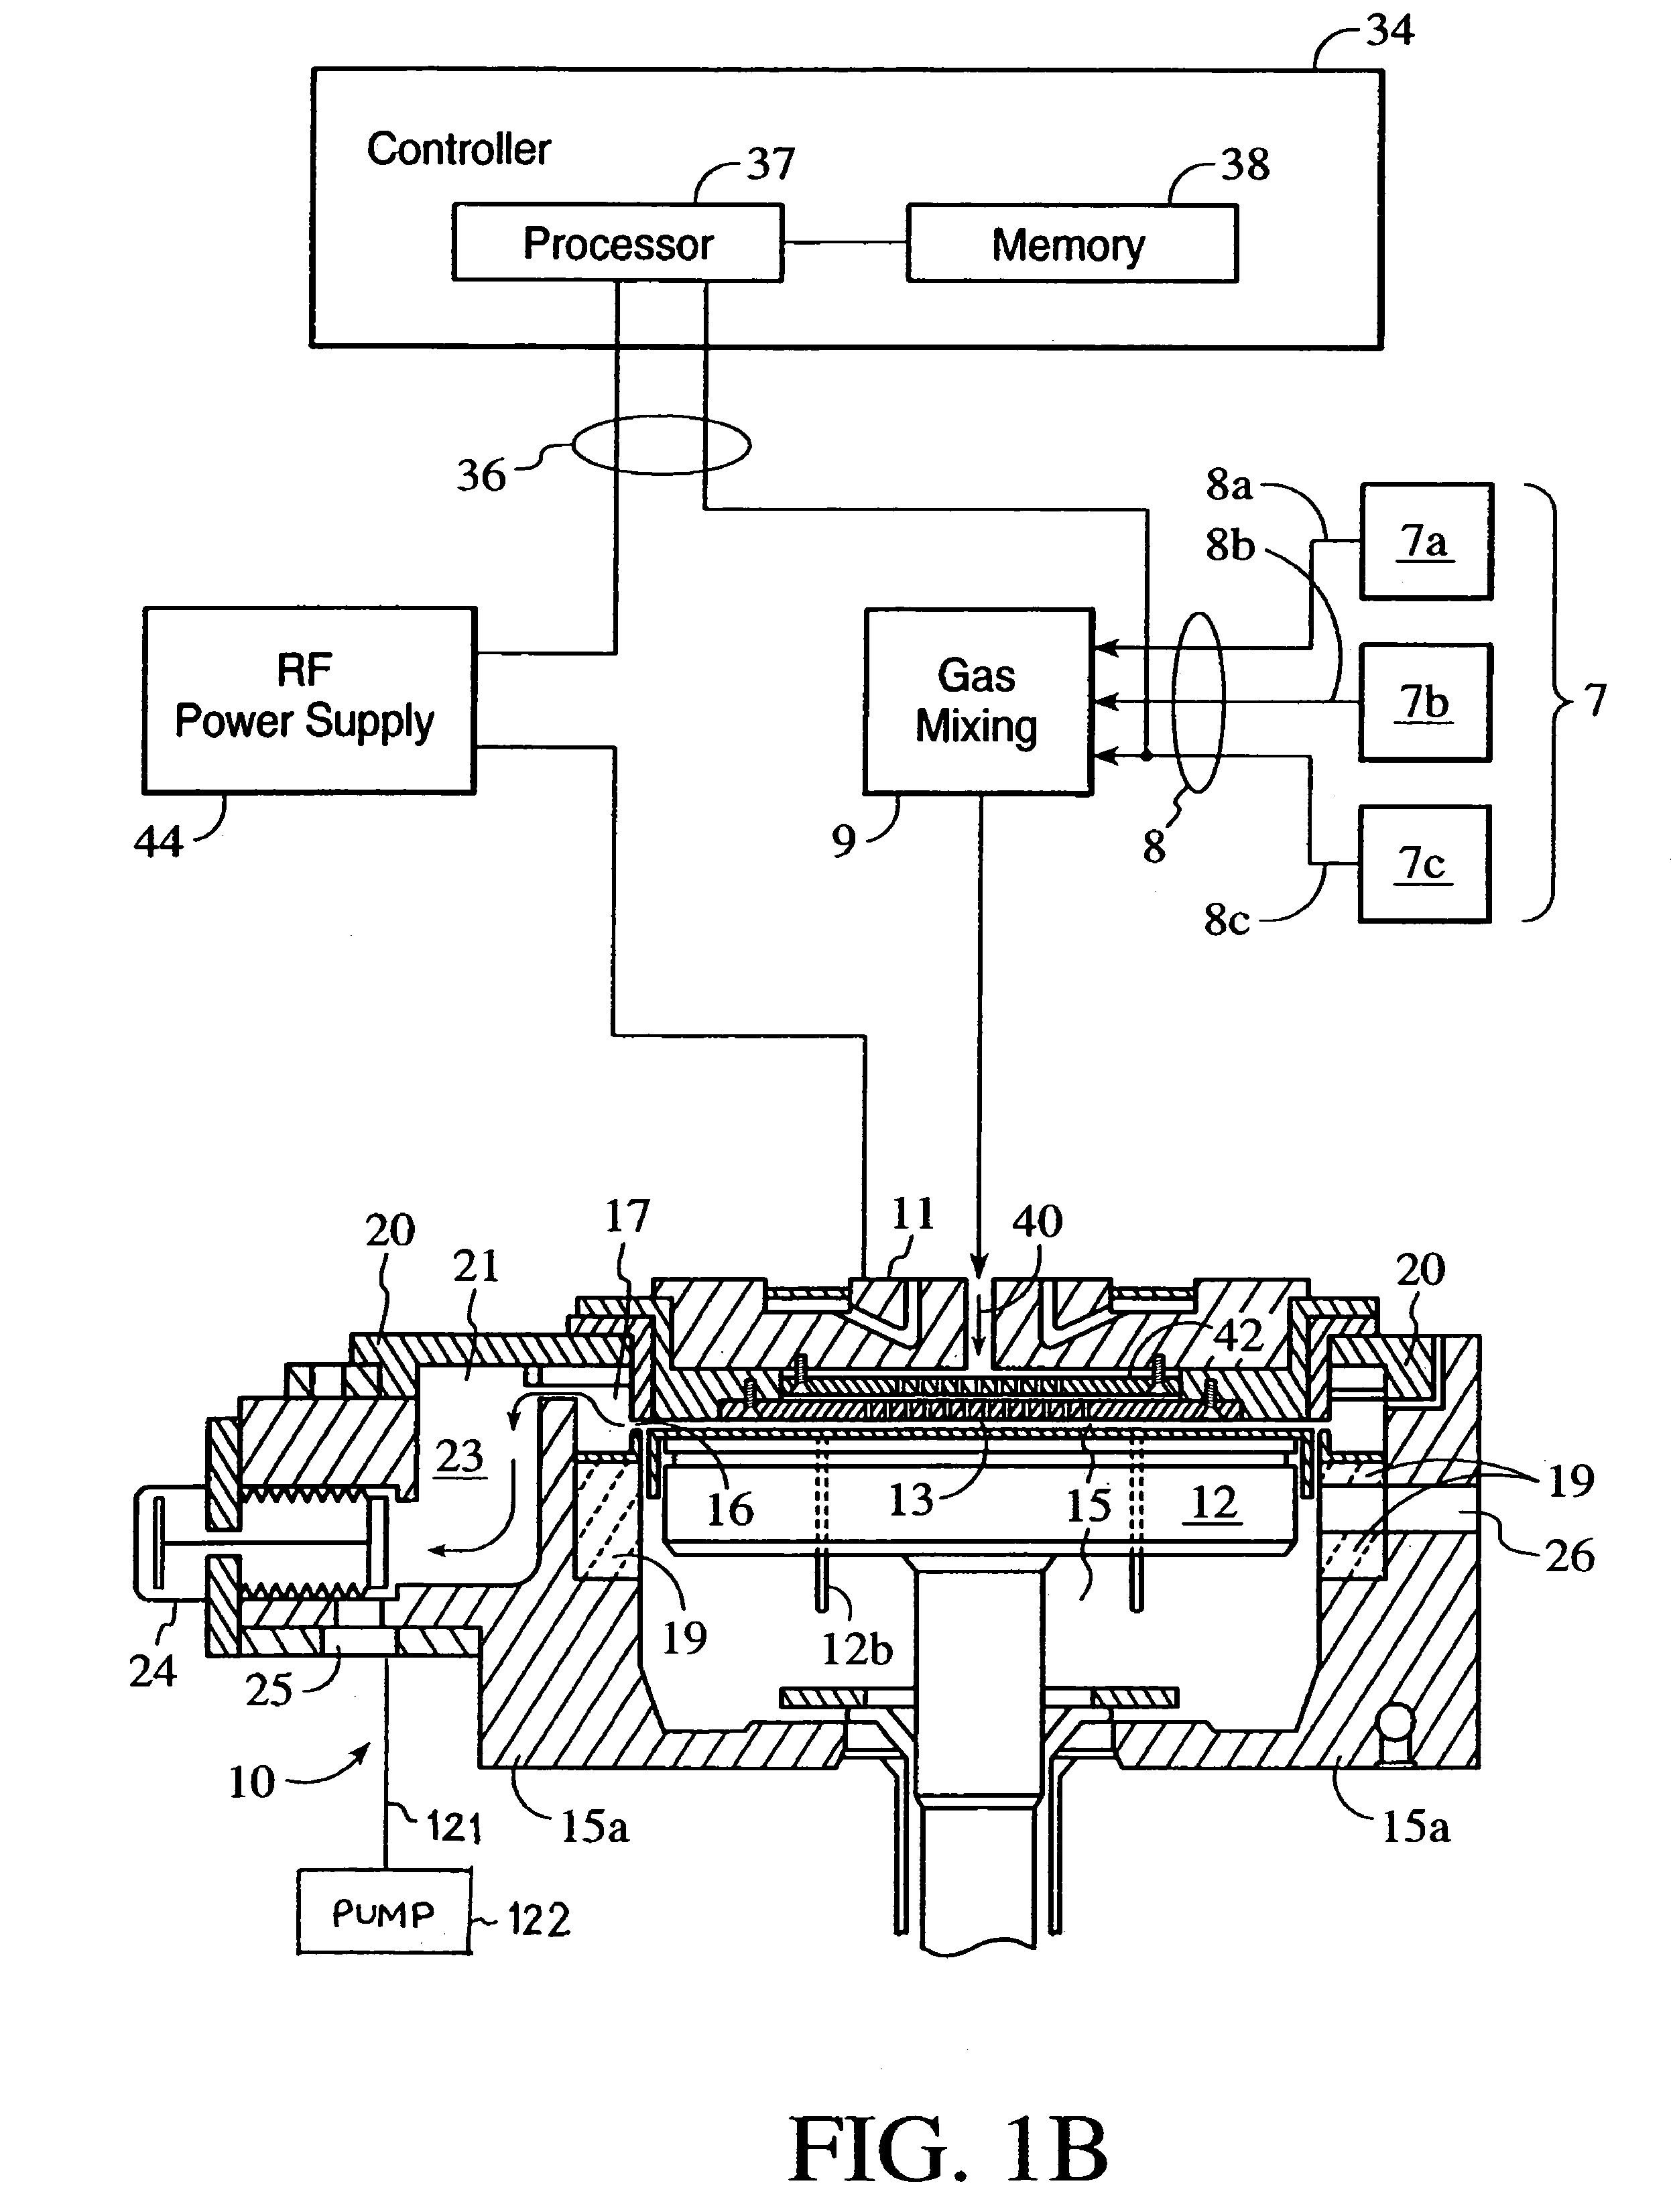 Remote plasma cleaning source having reduced reactivity with a substrate processing chamber